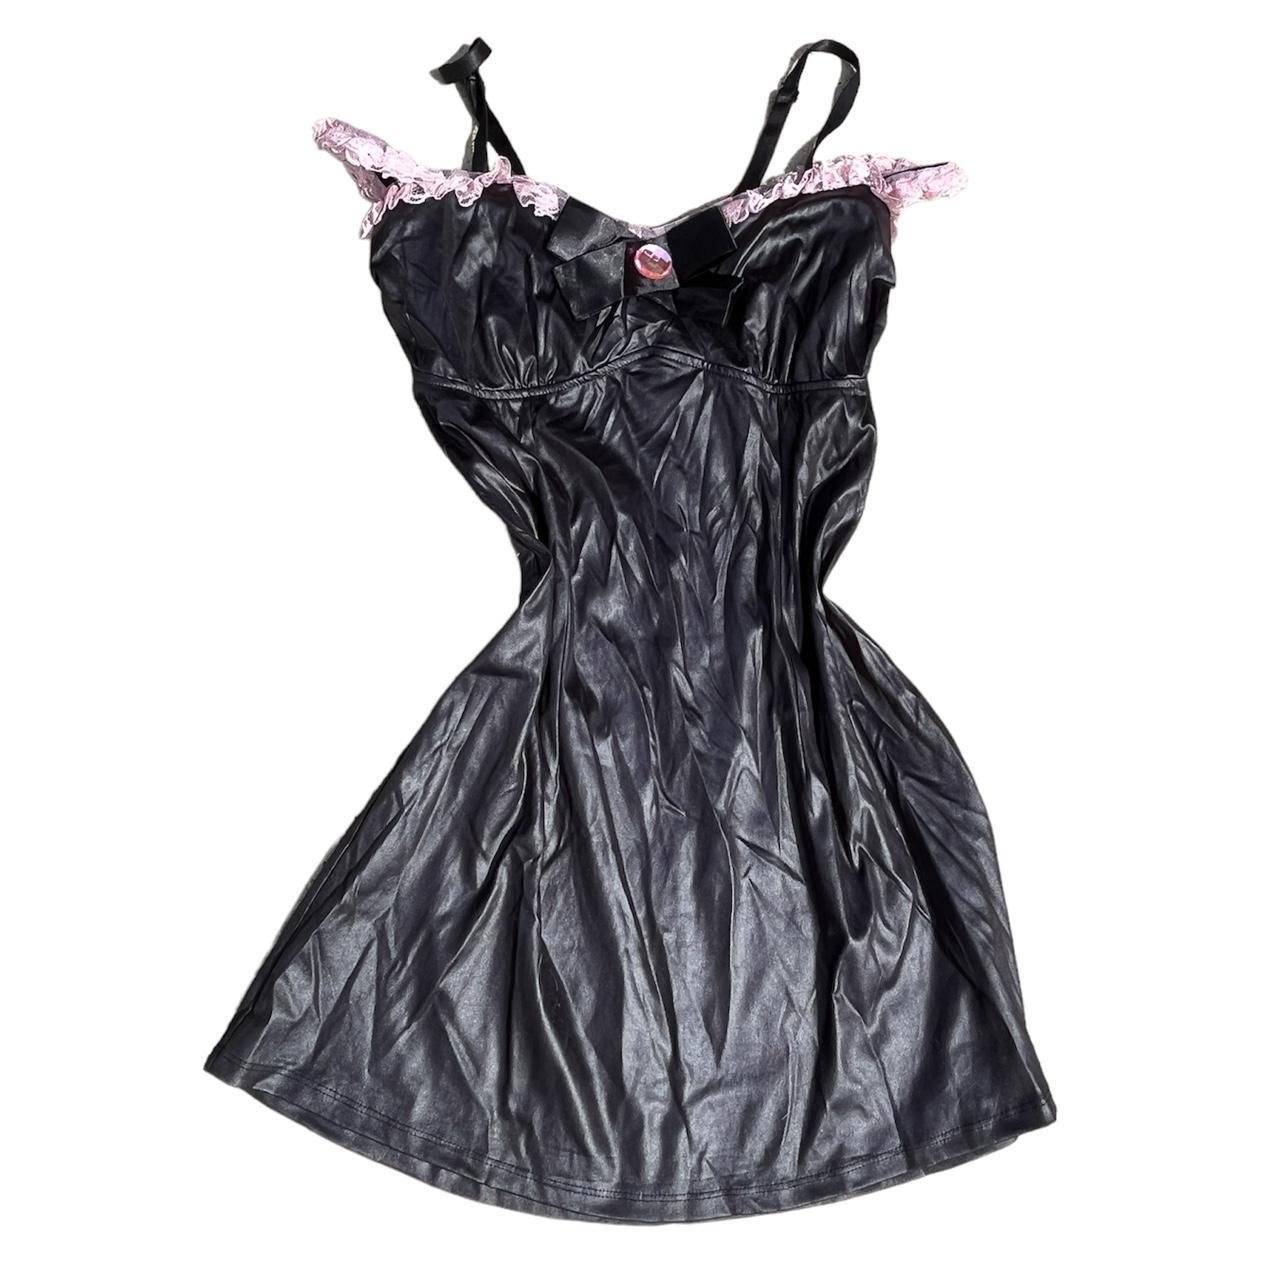 Dreamgirl Women's Black and Pink Dress